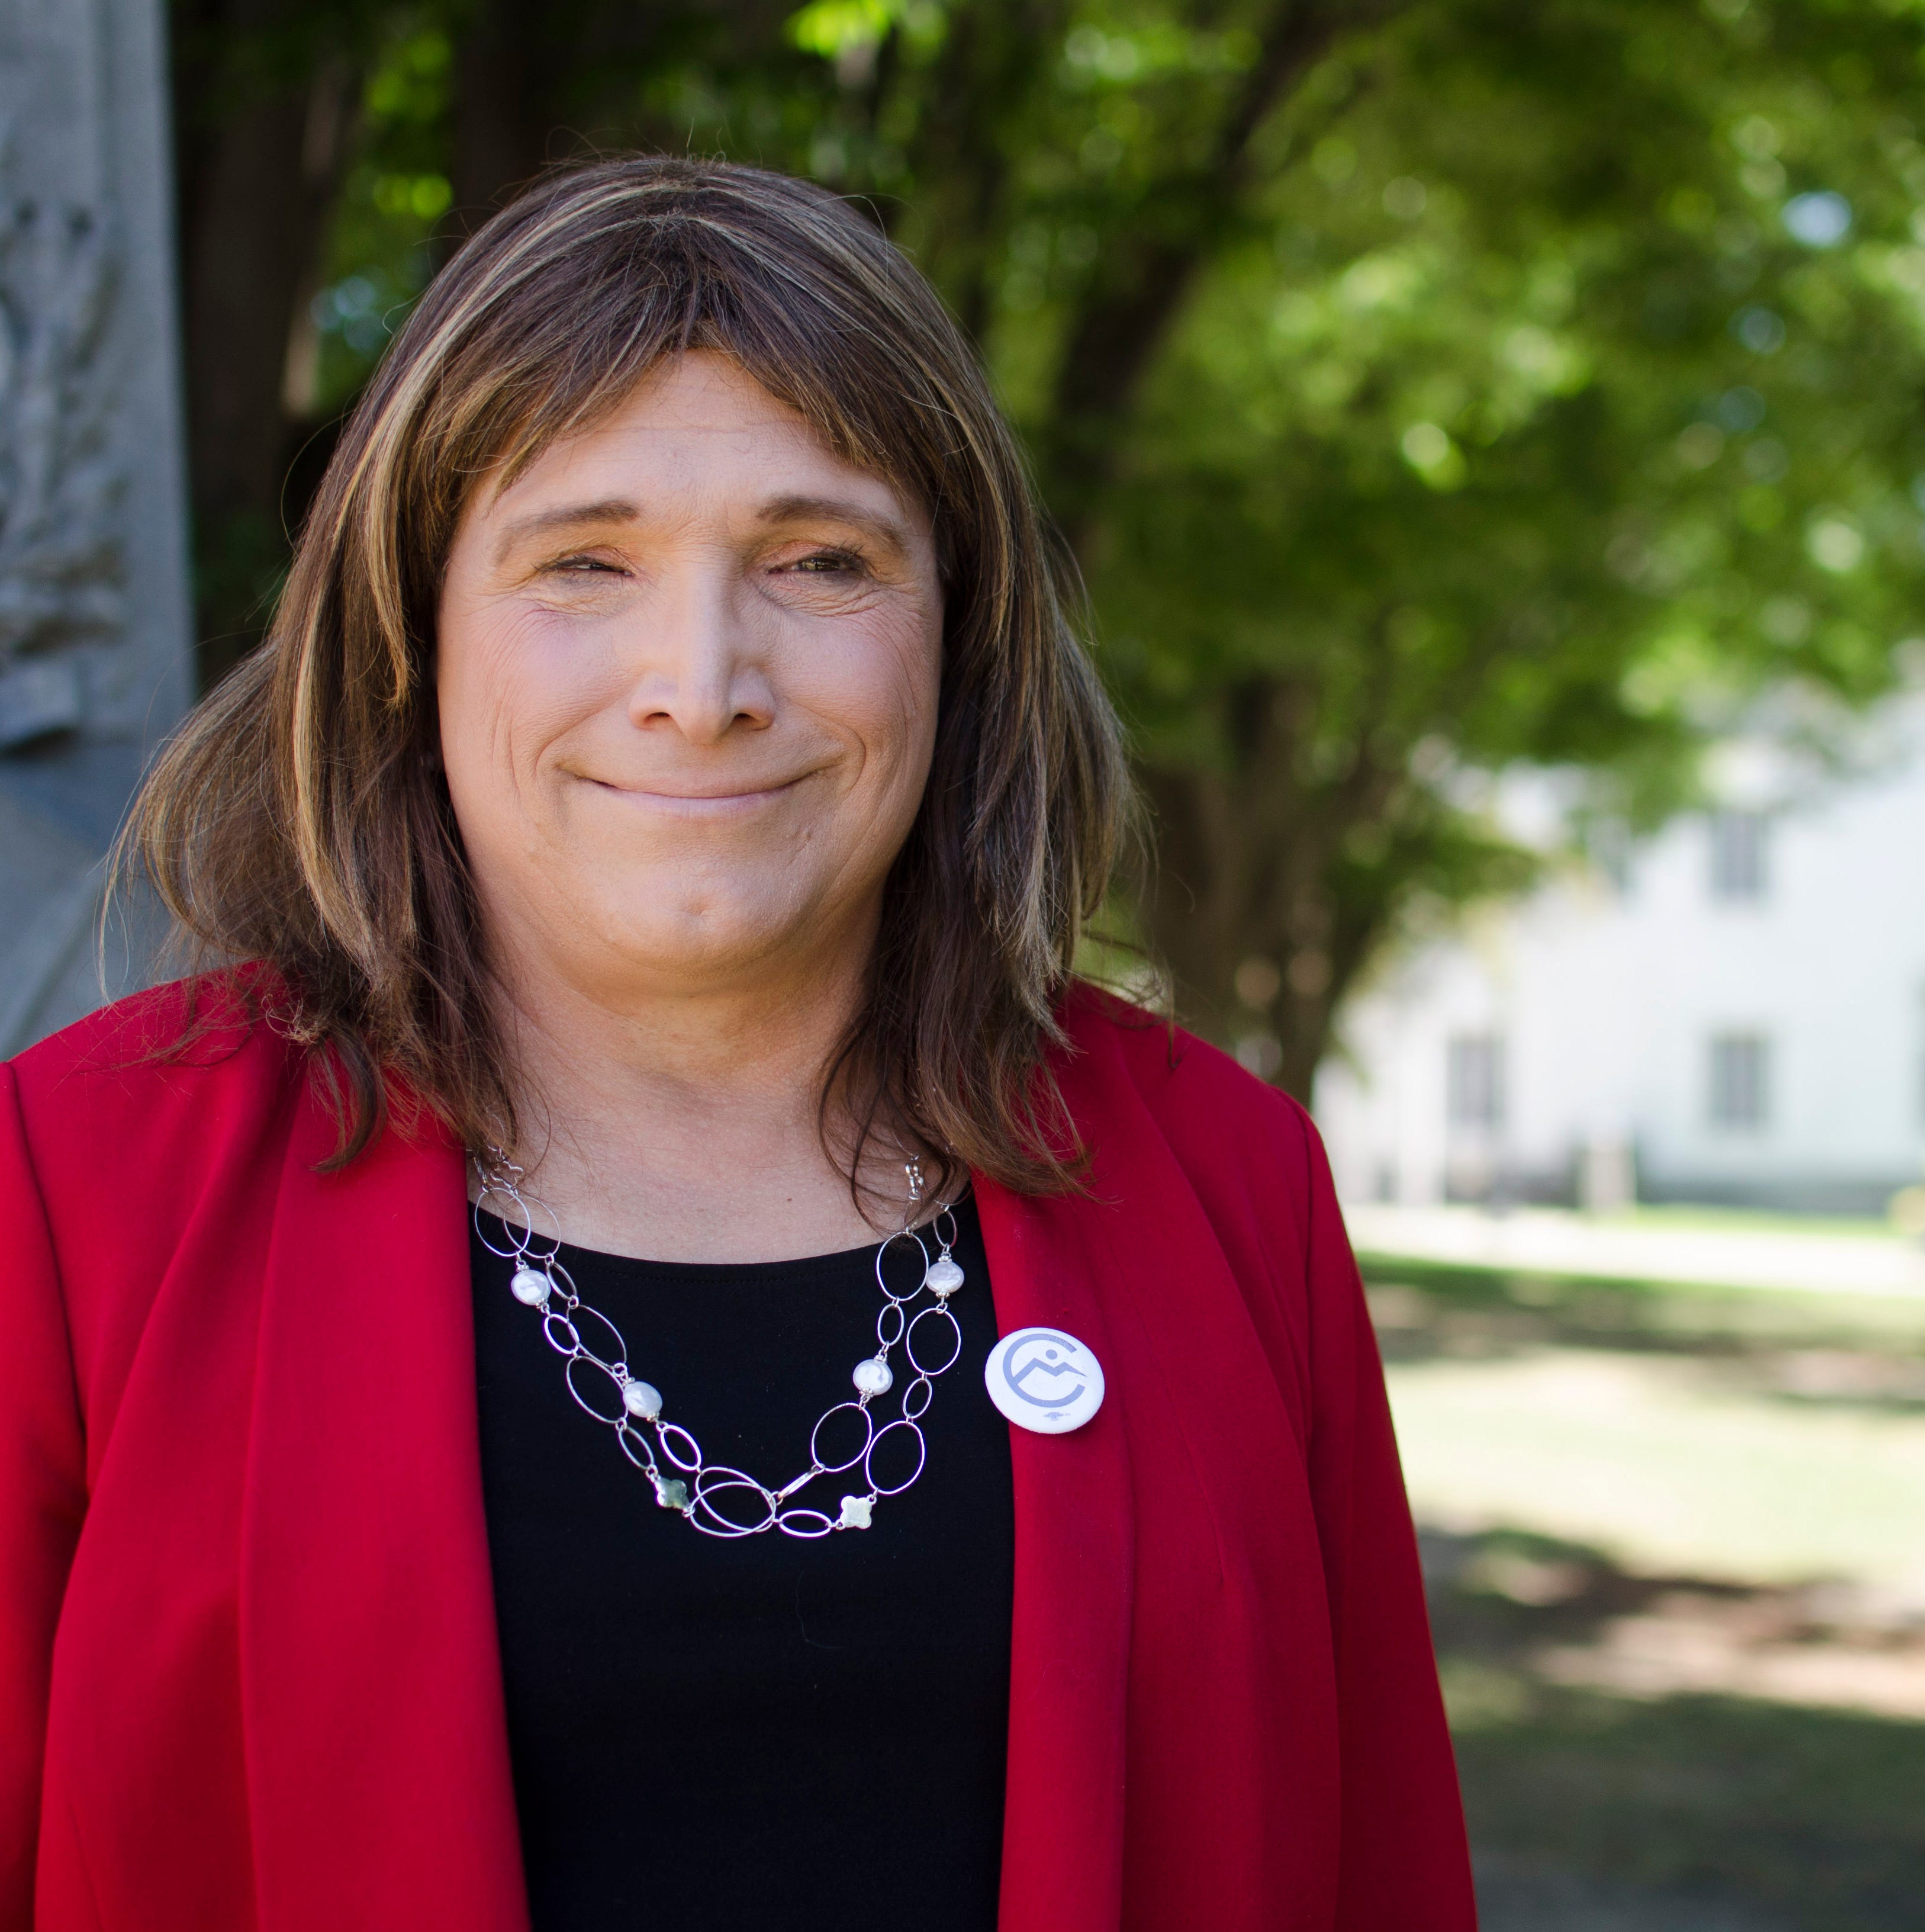 Christine Hallquist, a Democratic candidate for governor, is pictured in Burlington on July 19, 2018.